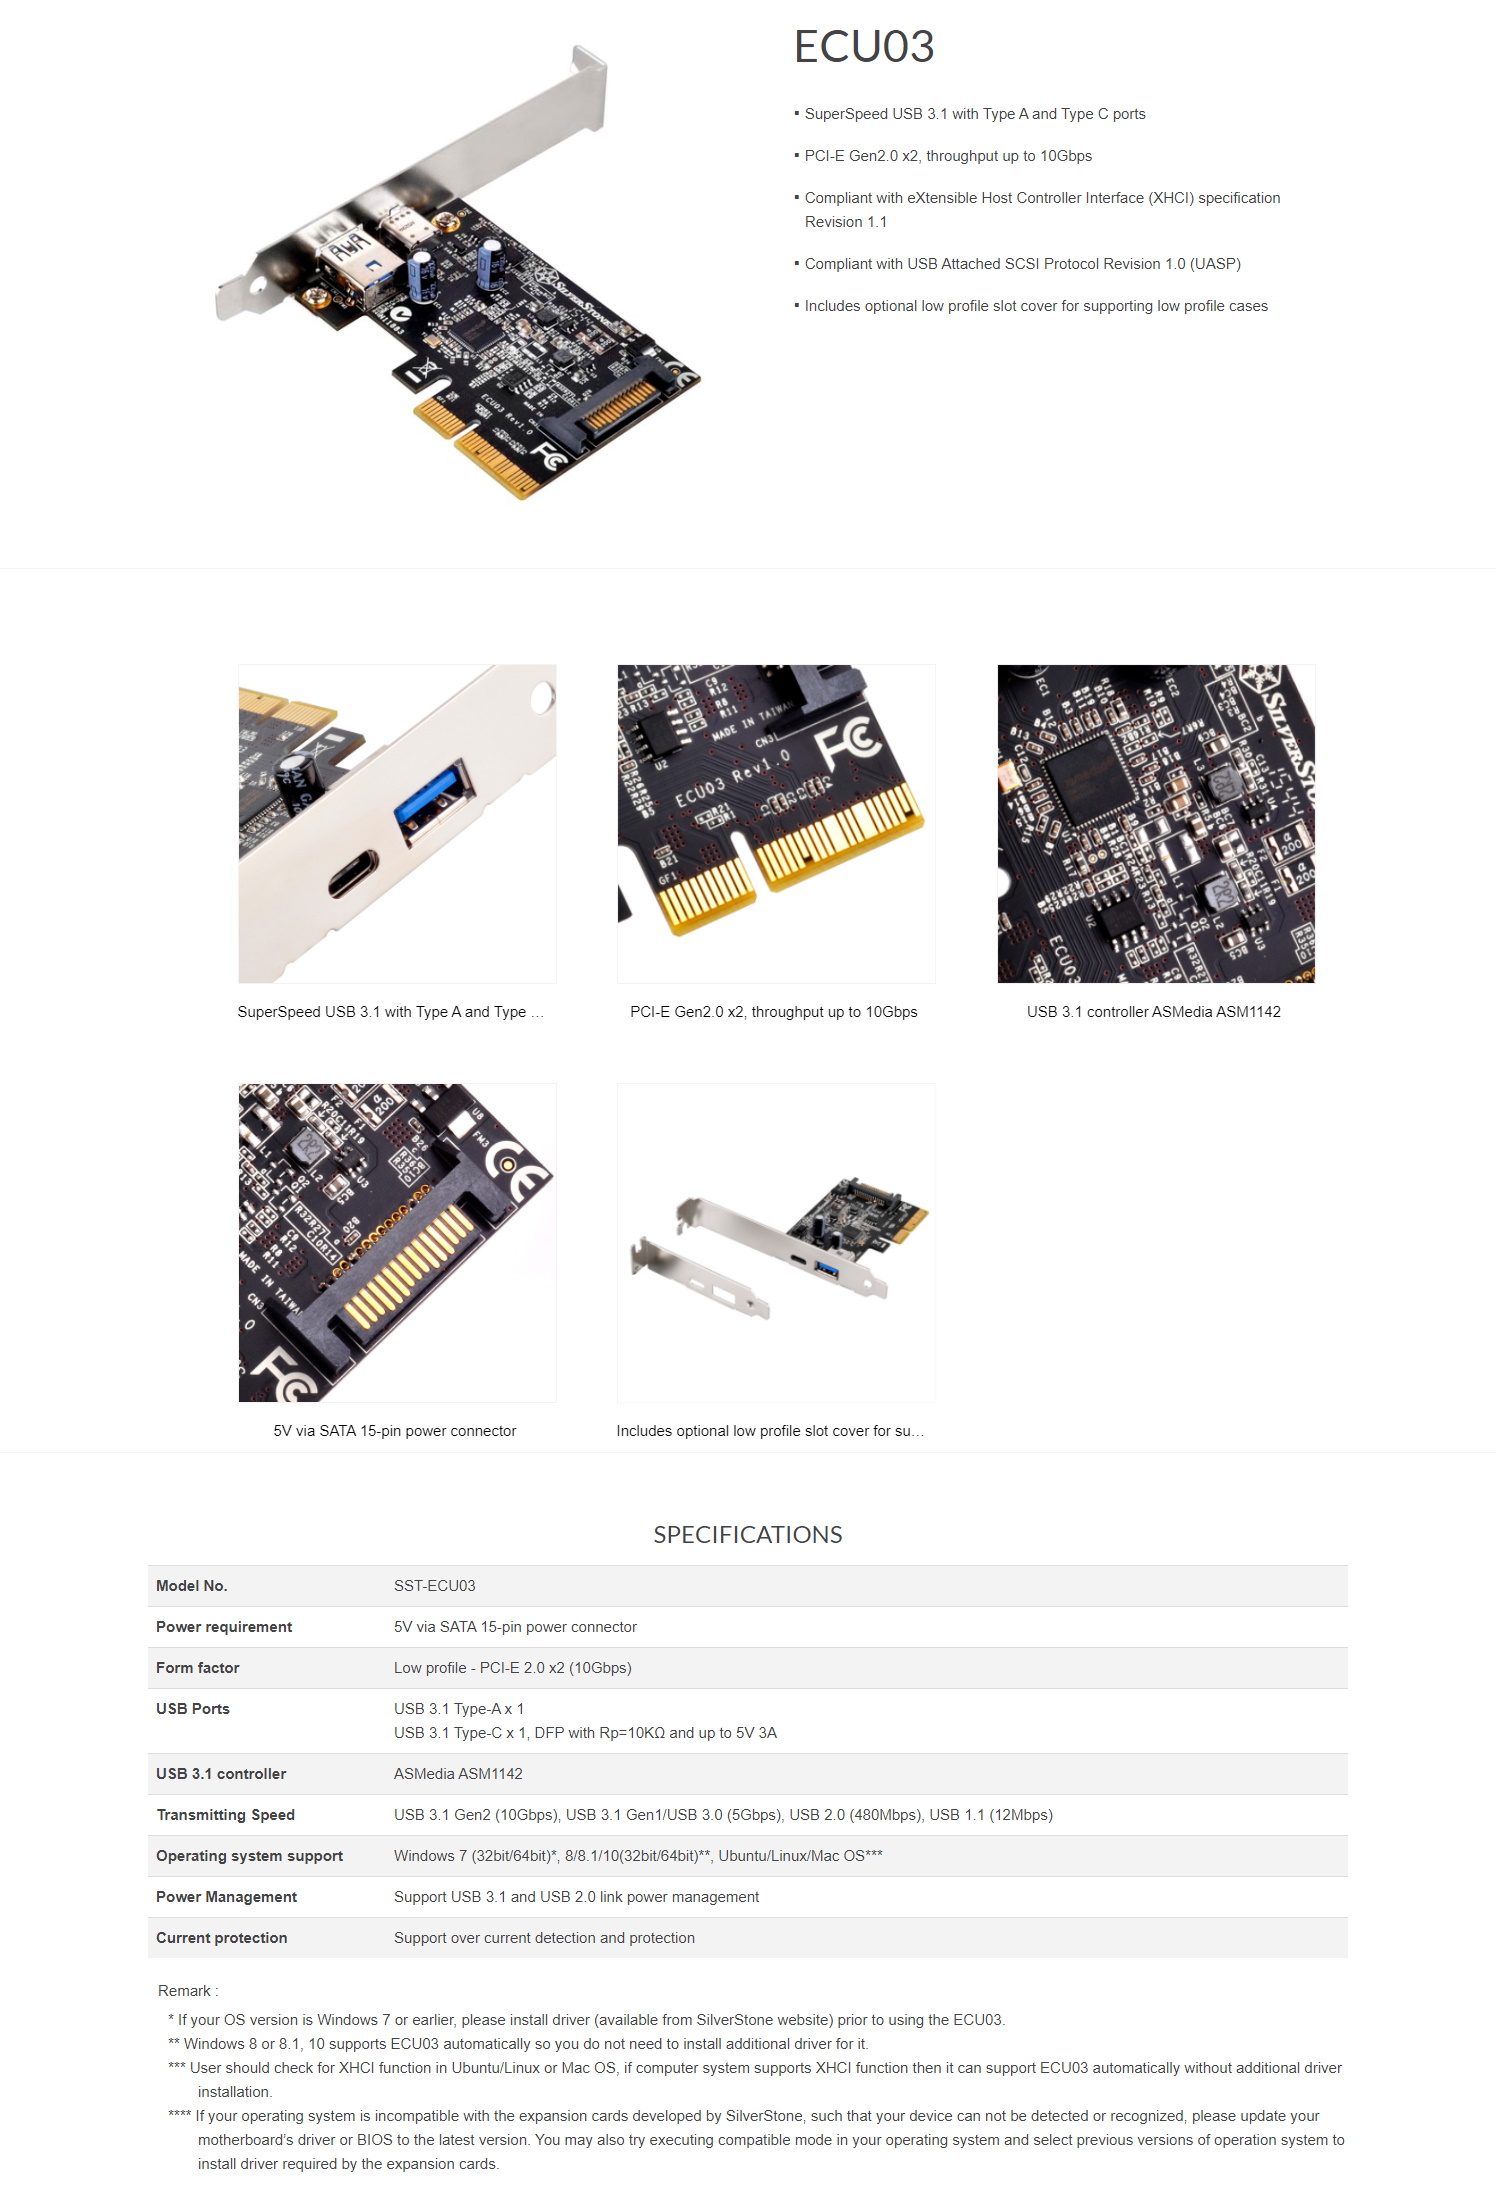 A large marketing image providing additional information about the product SilverStone ECU03 USB3.1 PCIe Controller Card with 1x USB Type-A and 1x USB Type-C Port - Additional alt info not provided